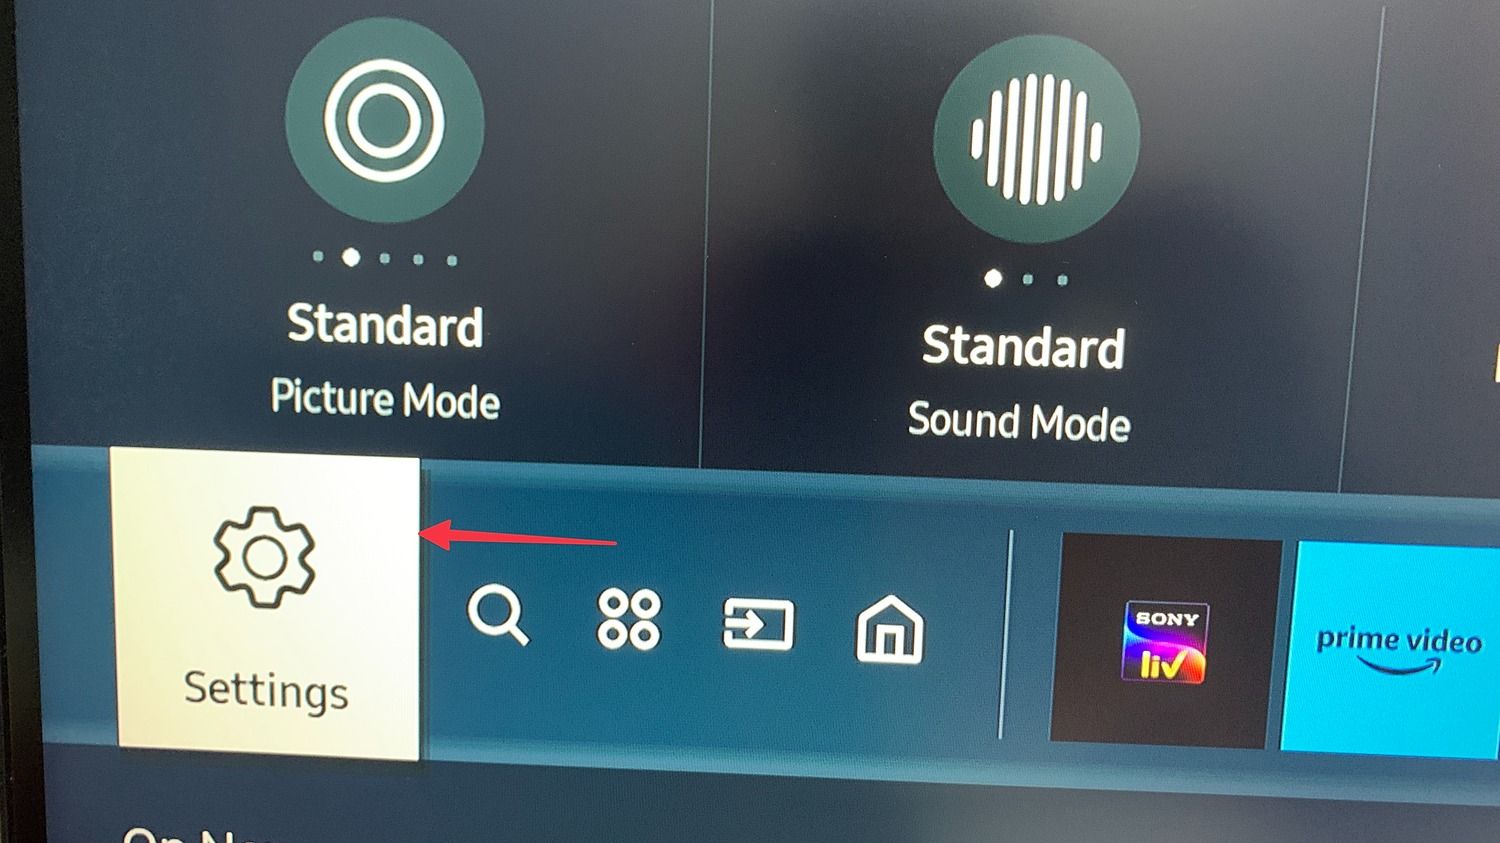 Samsung TV home screen with an arrow pointing to the Settings icon